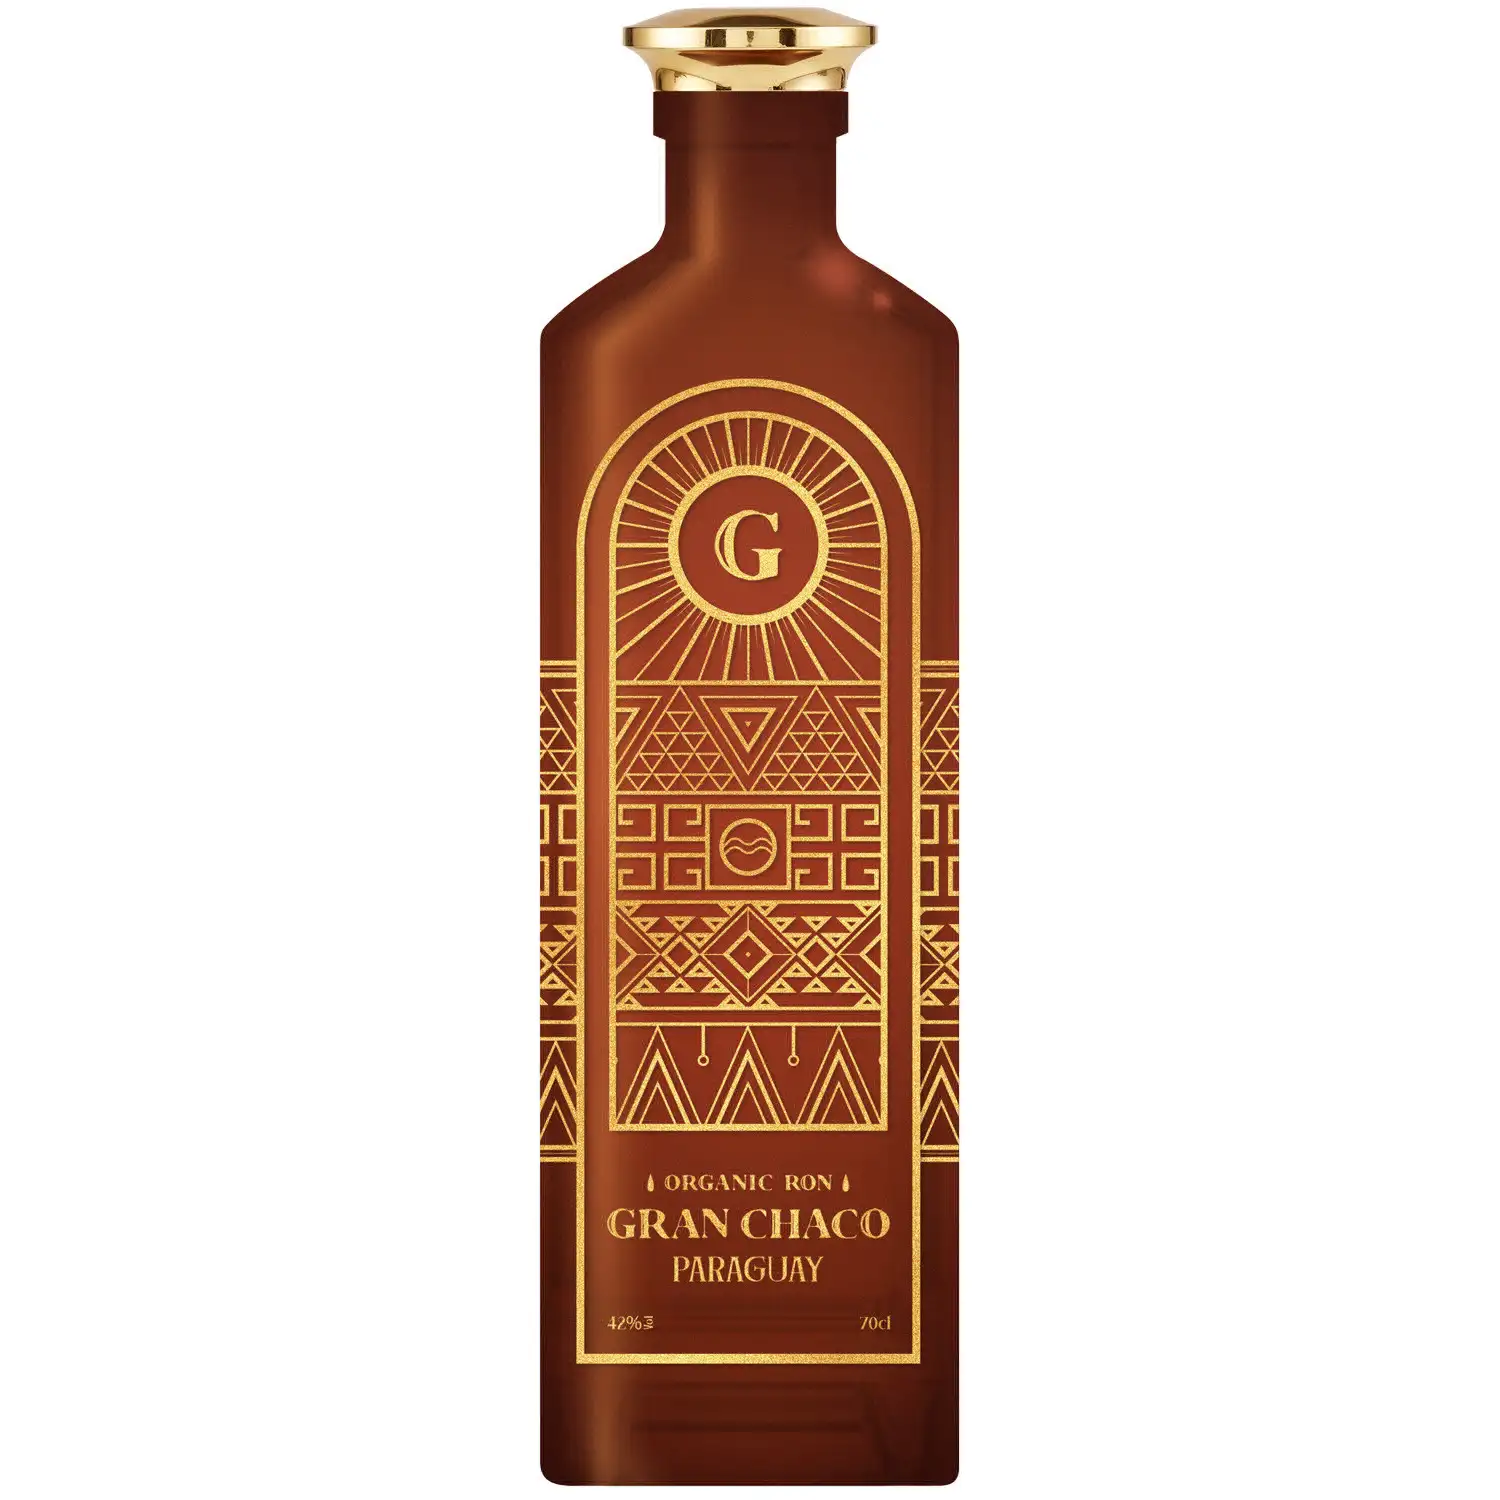 Image of the front of the bottle of the rum Gran Chaco Organic Rum